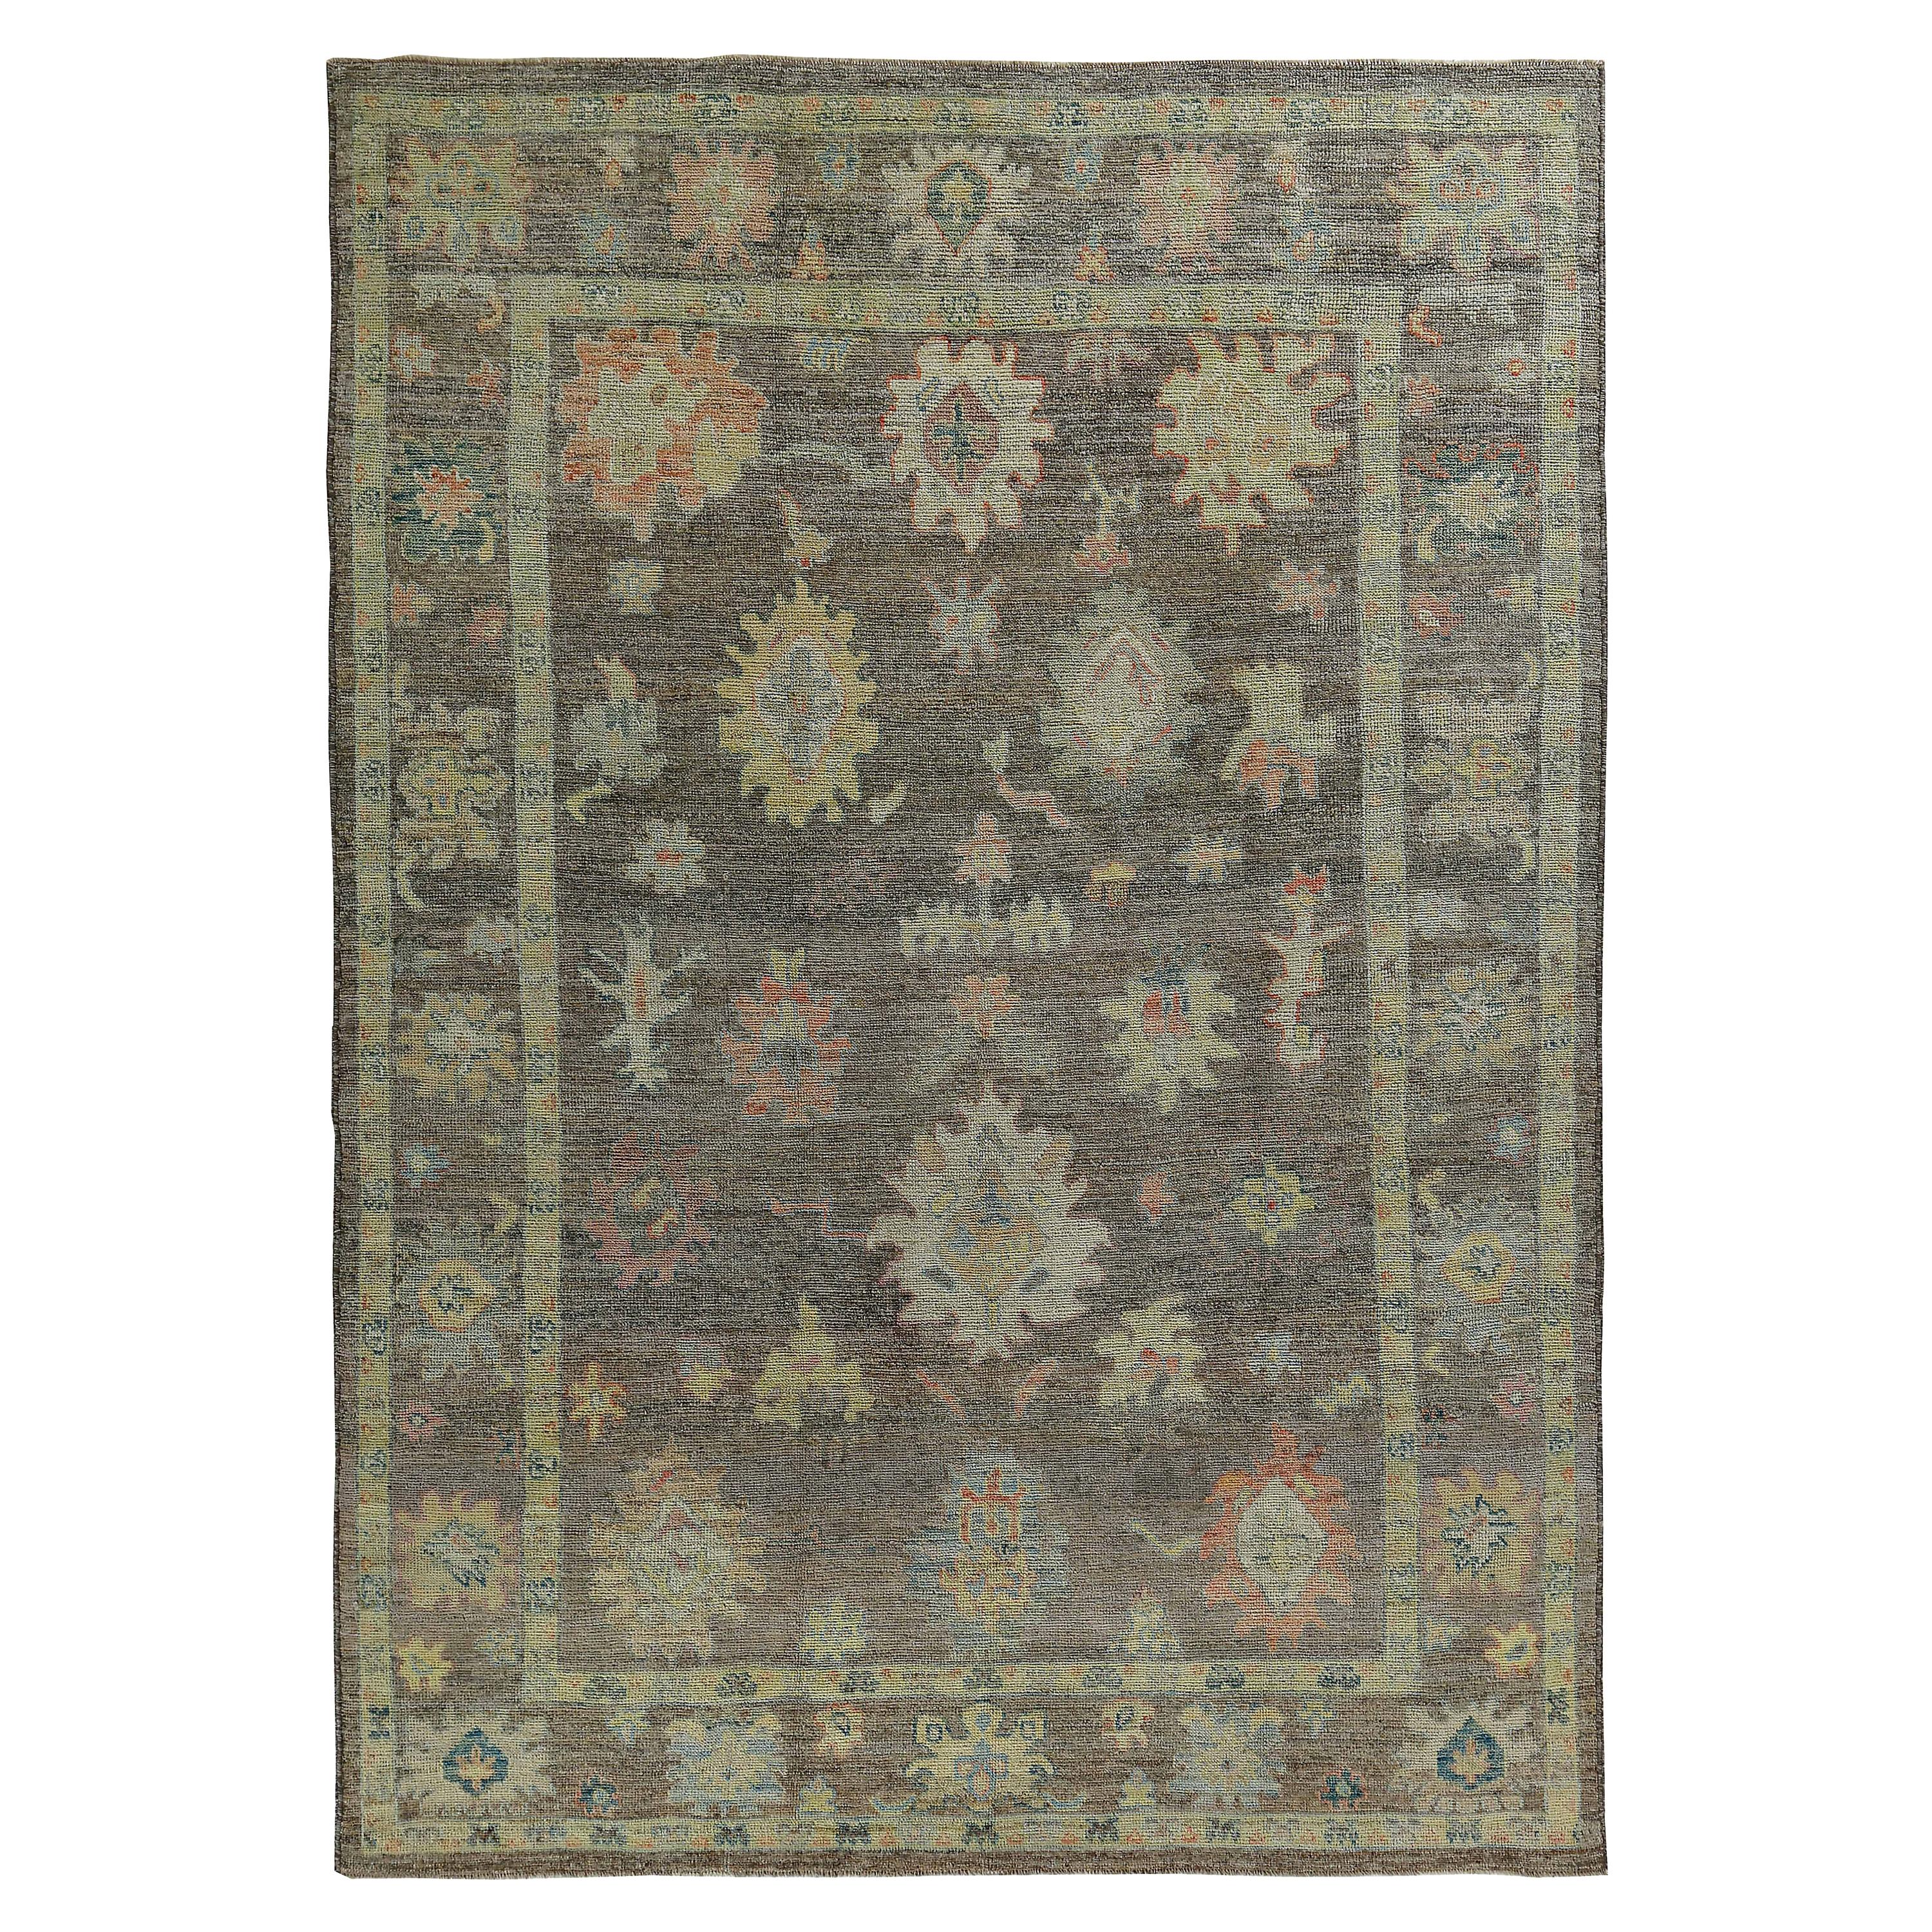 New Turkish Oushak Rug with Bright Colored Flower Heads on Brown Field